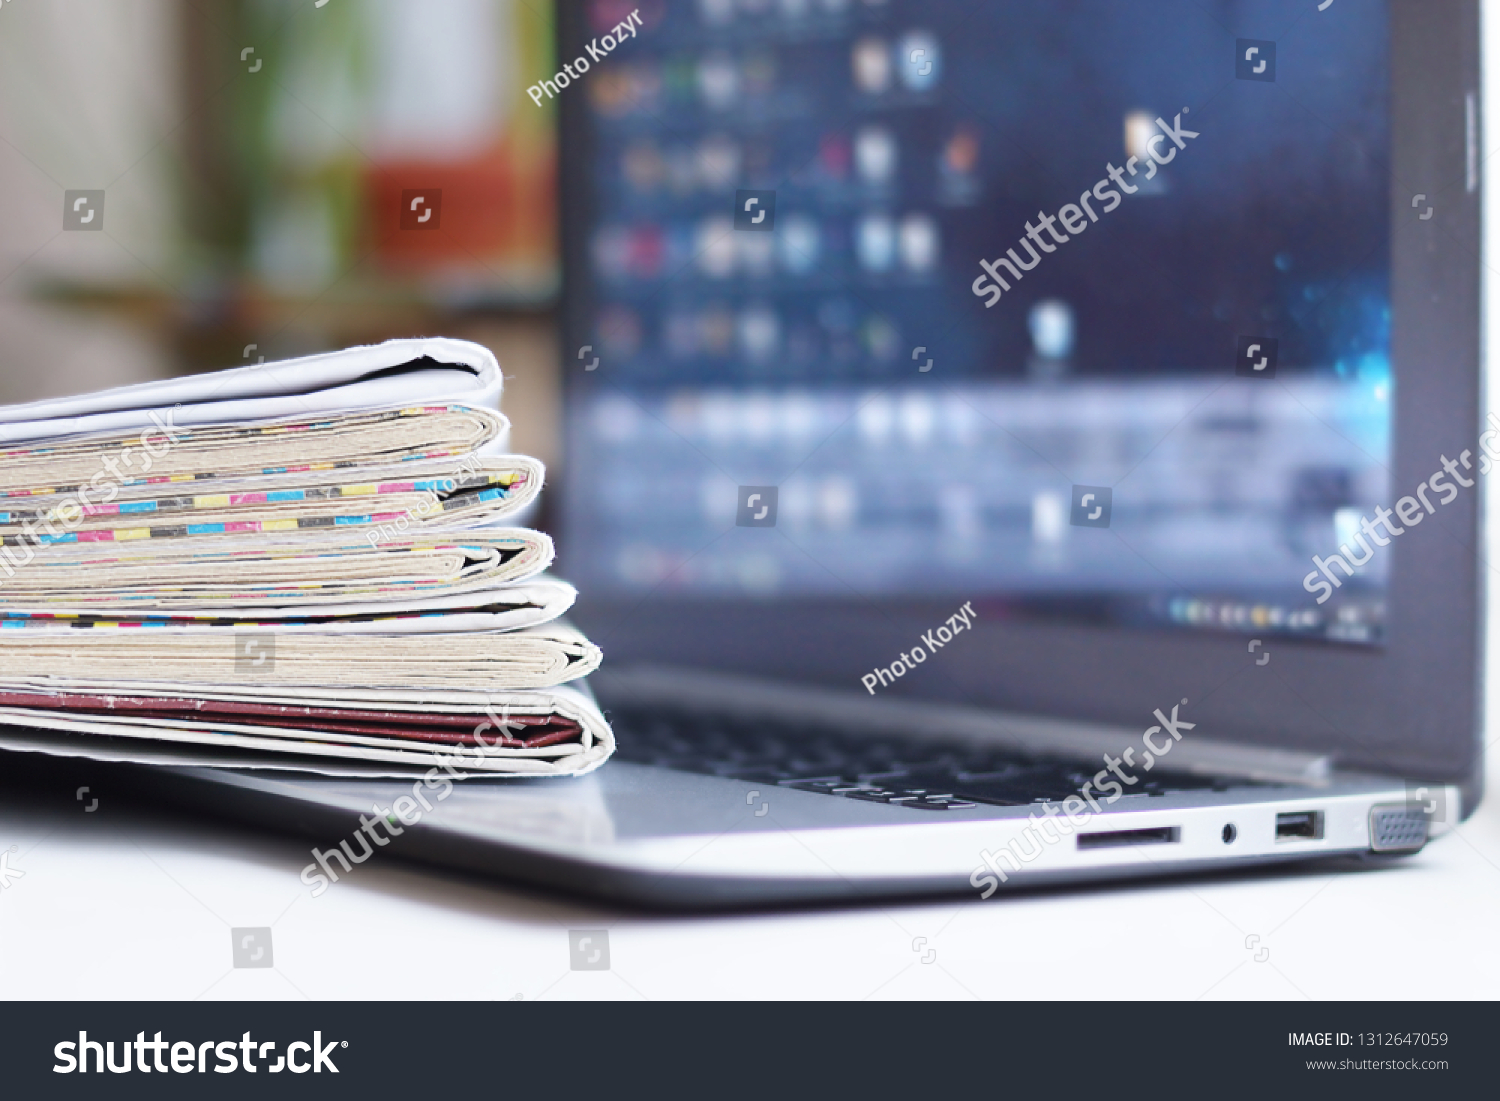 Newspapers and Laptop. Magazines and Journals and Computer. Paper Media and Electronic Device with Internet - Business News and Financial Information. Headlines, Articles and Digital Content #1312647059